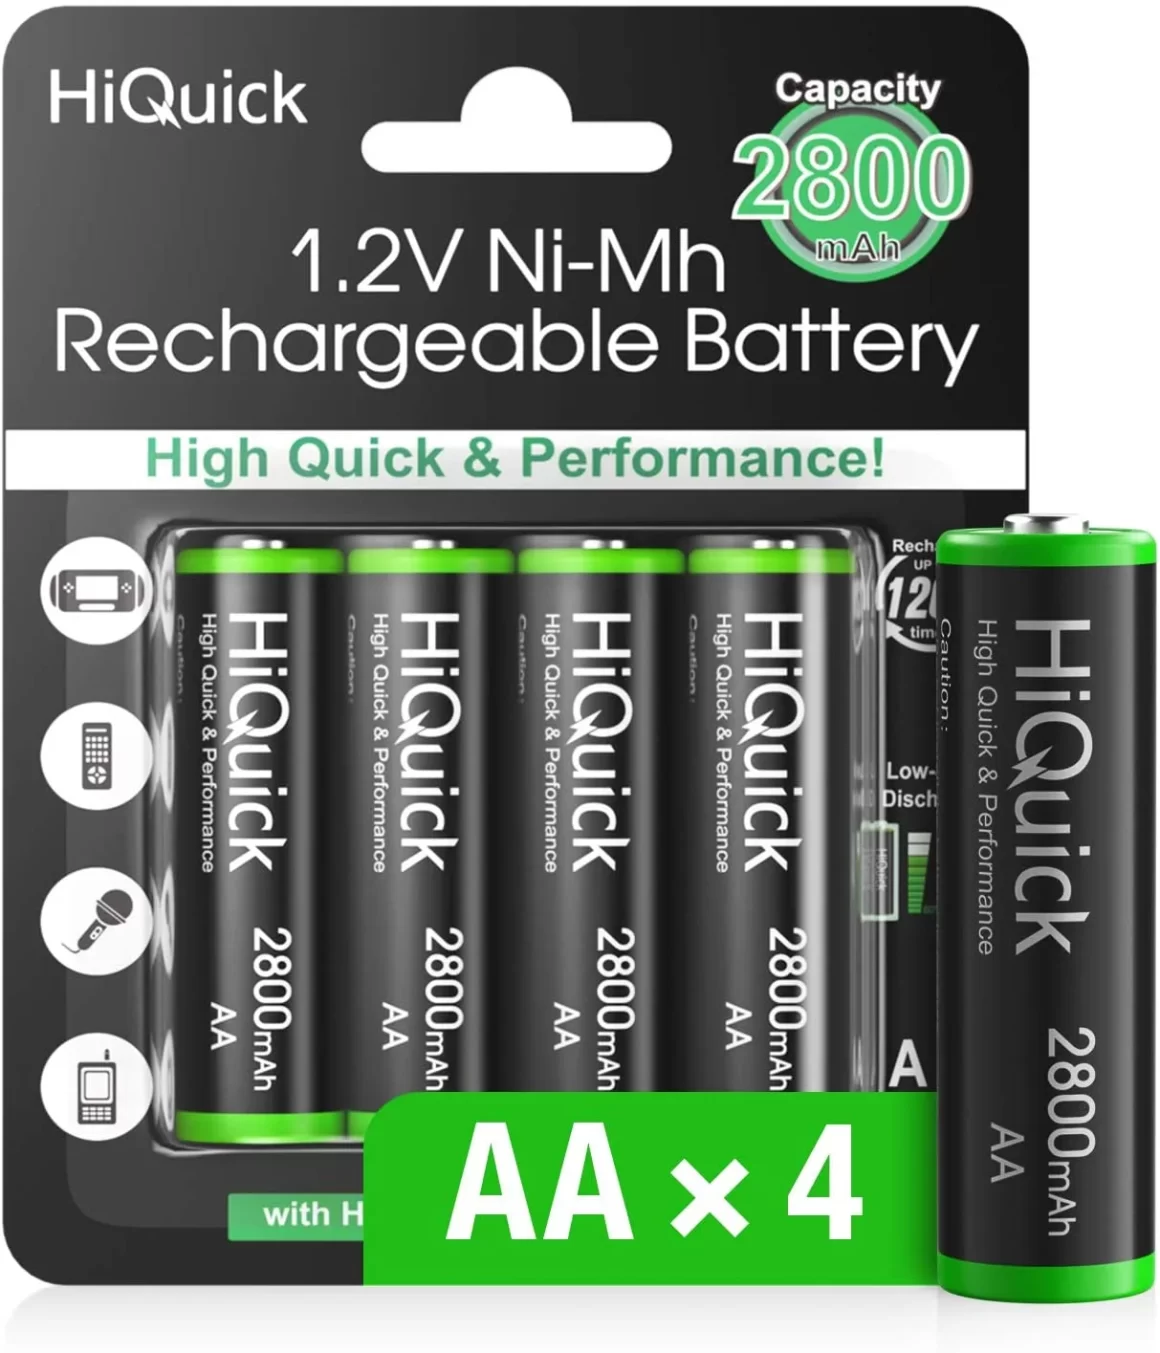 7e72a88d23e54c76bde866b1b08b75f0 1160x1353 - 5 Best rechargeable batteries you can buy in 2023